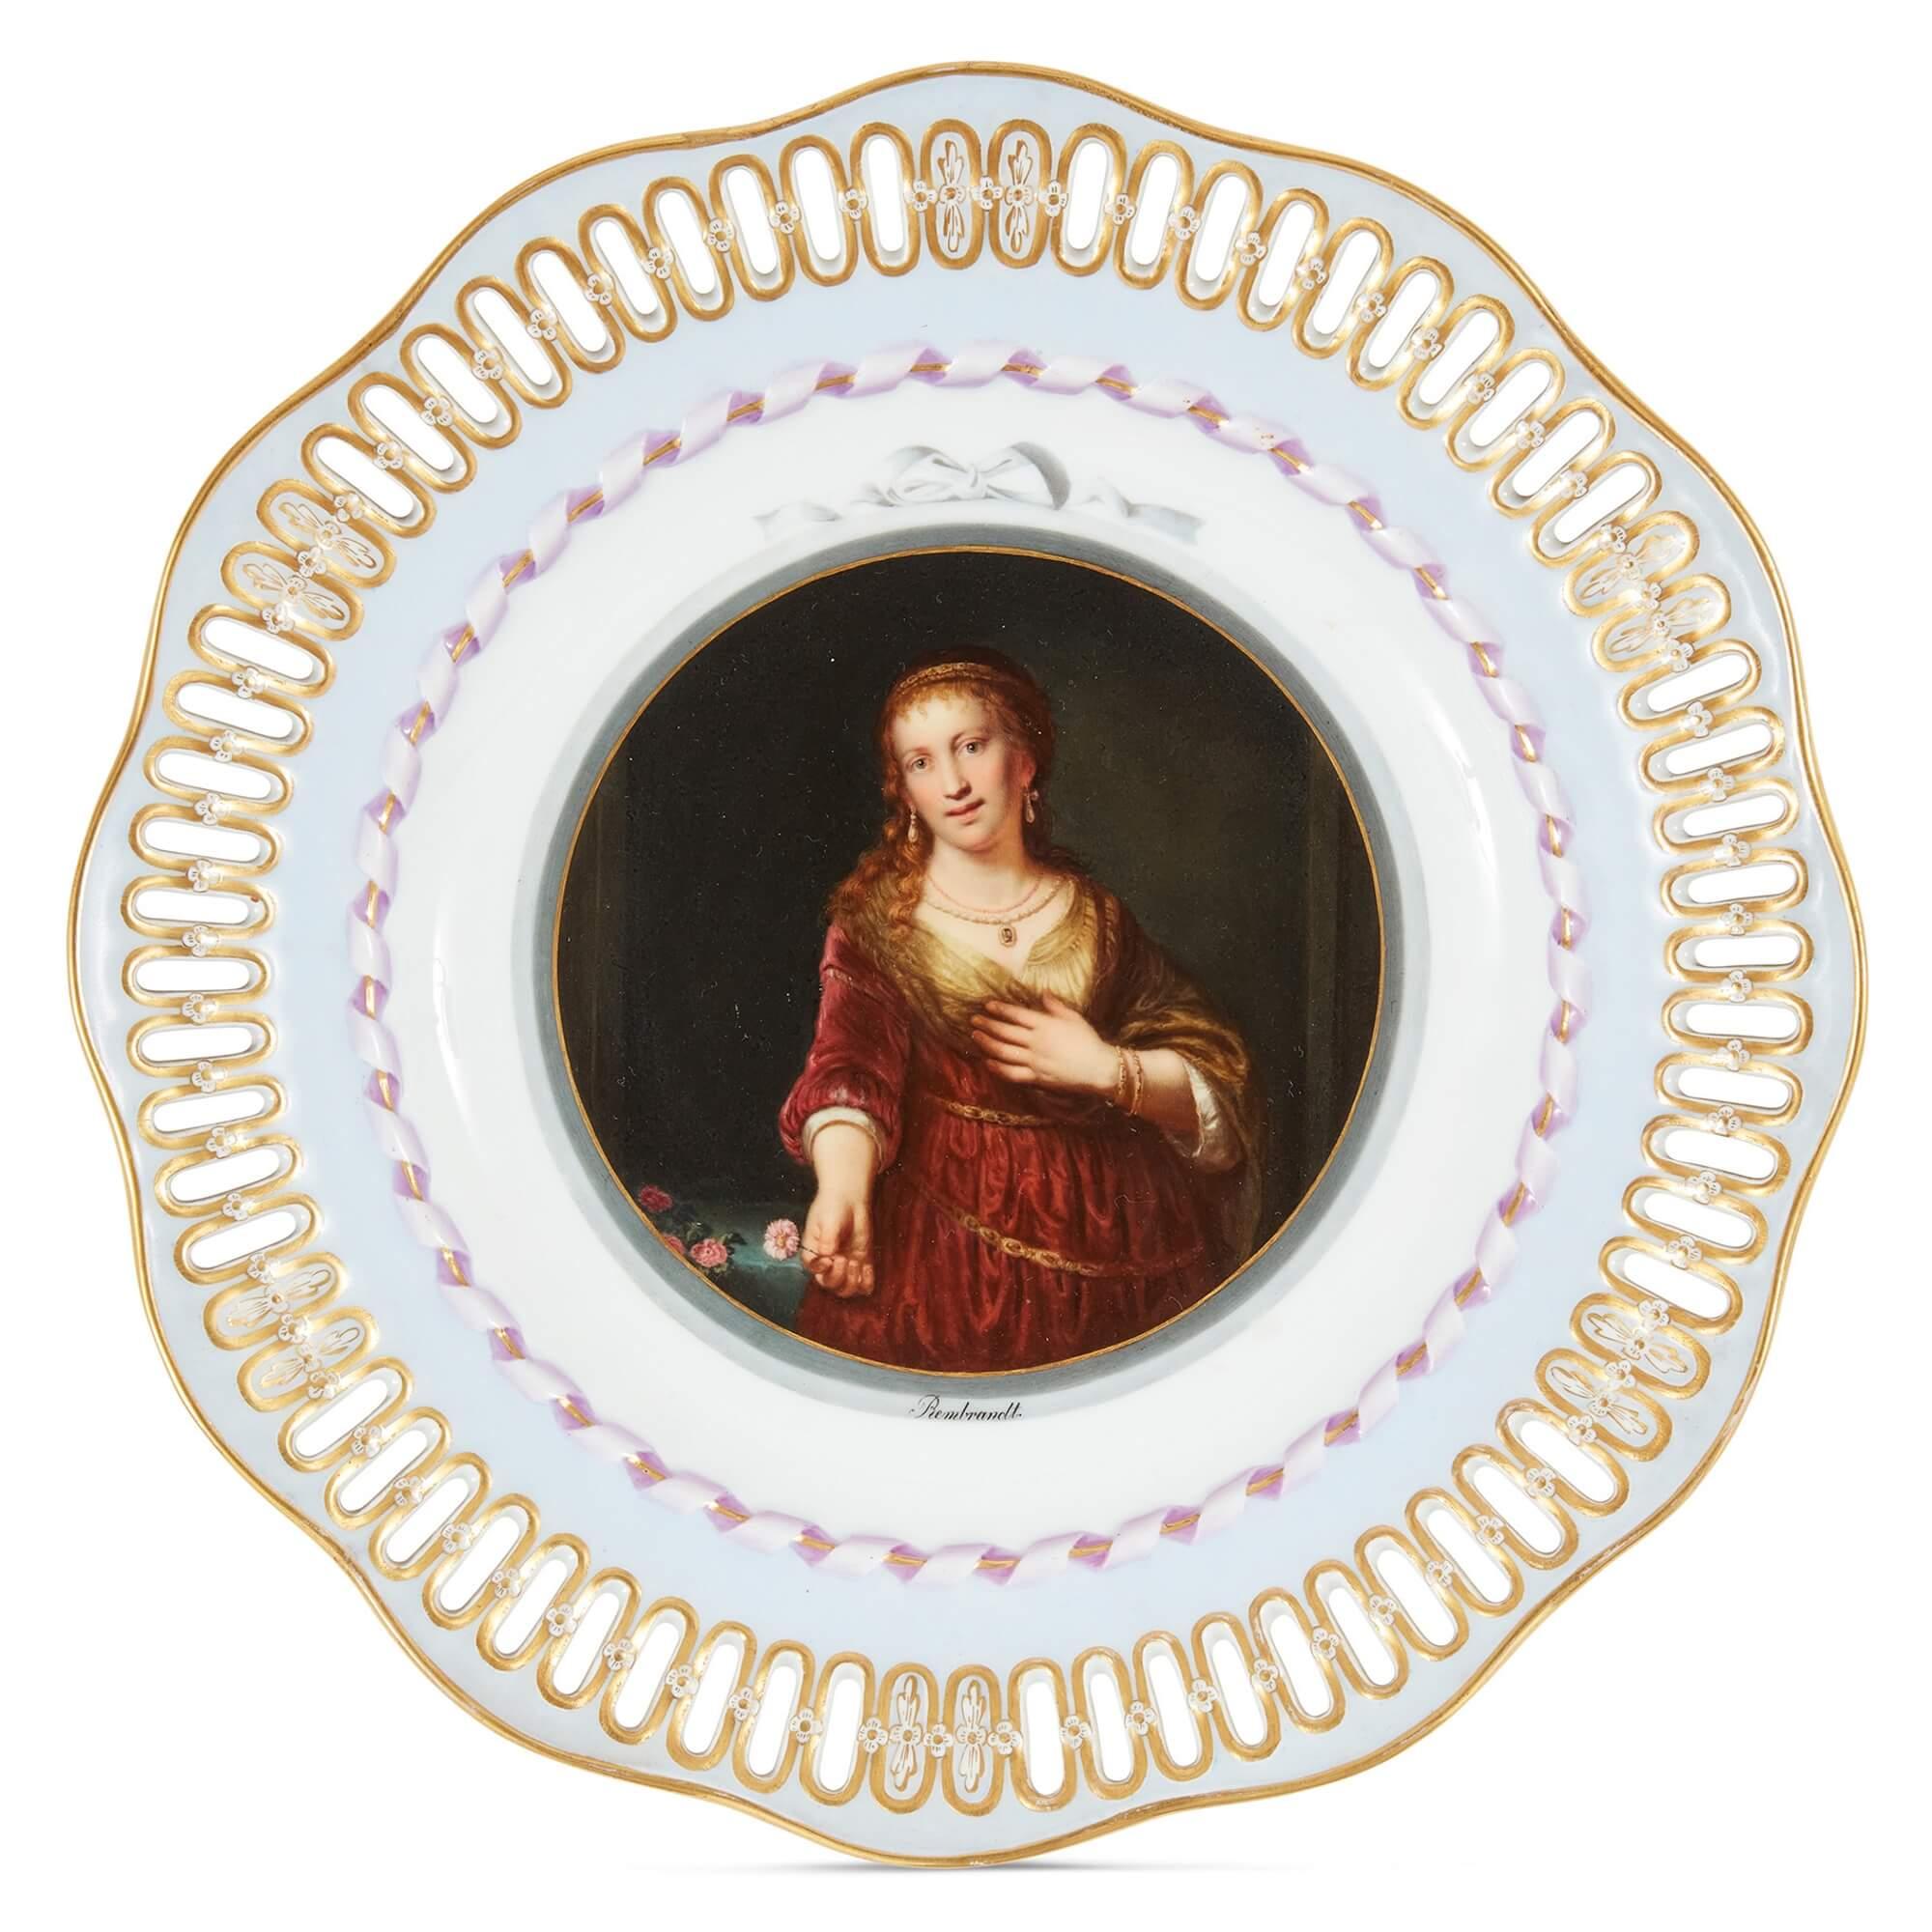 Three Meissen porcelain plates showing Old Master paintings
German, c. 1880
Height 3.5cm, diameter 24cm

Created by the renowned German porcelain manufactory Meissen in the late 19th century, this set of porcelain plates combines the legacy of Old